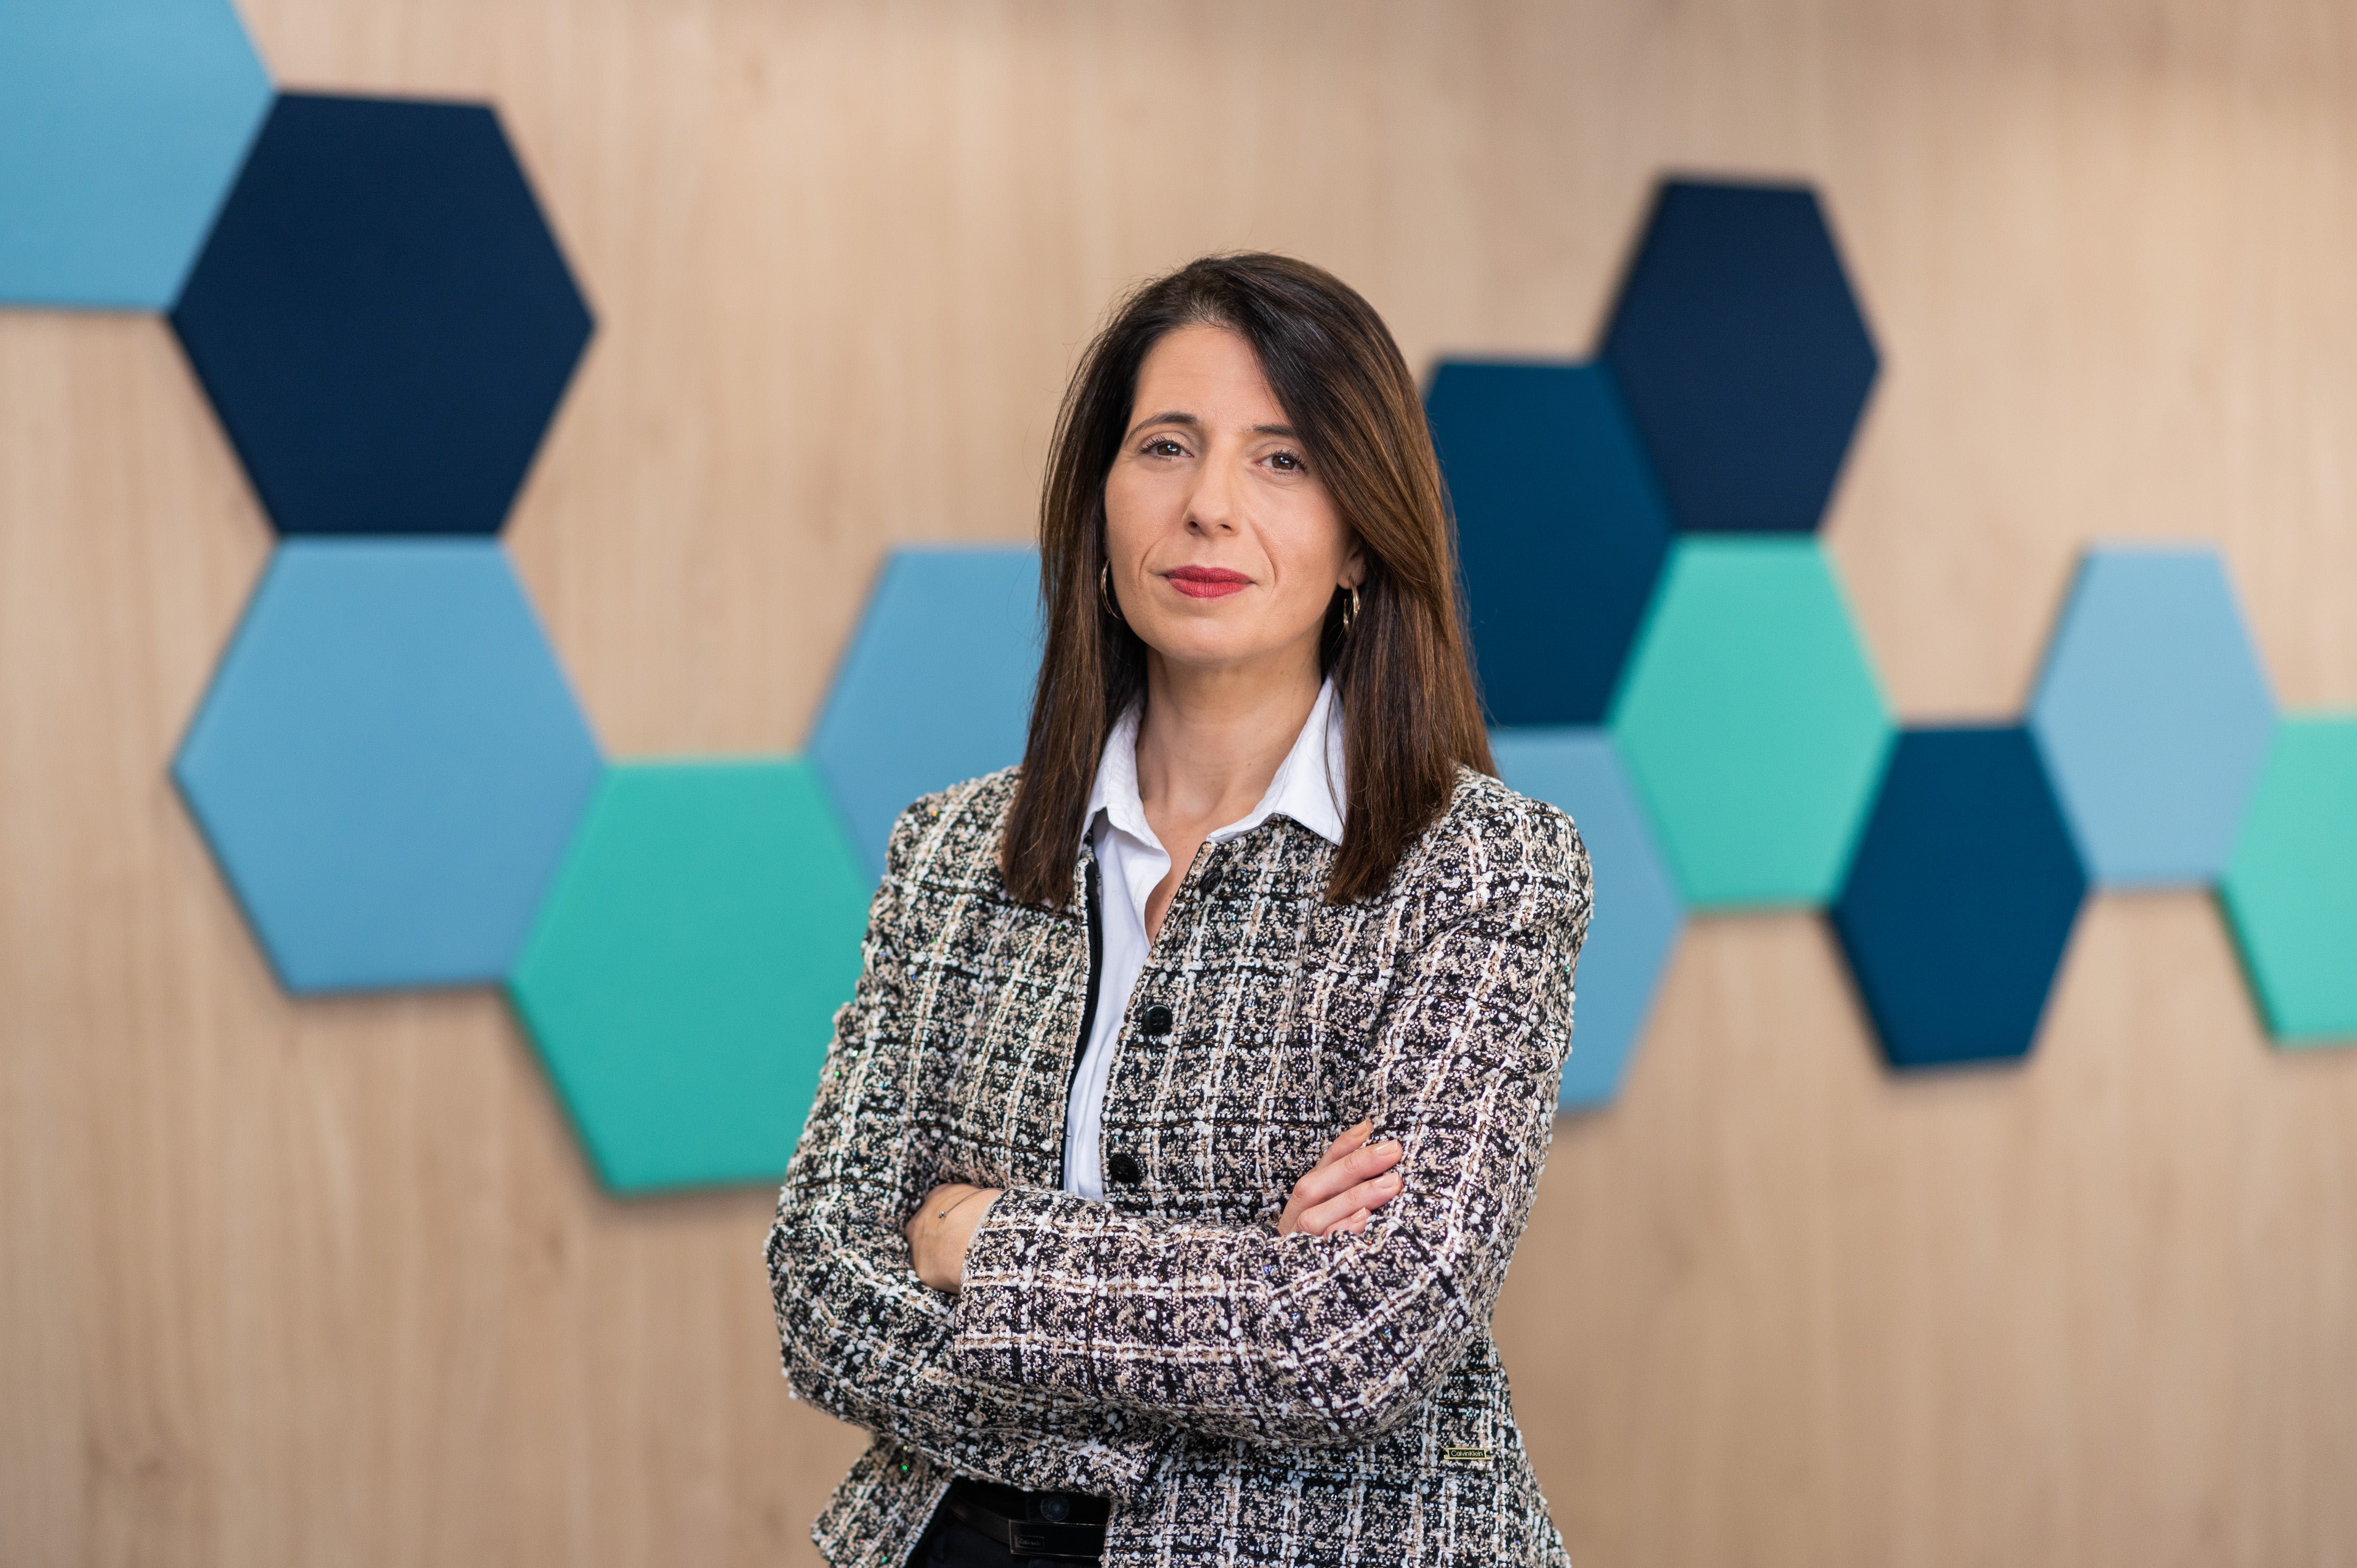 GENERAL MANAGER ALMIRALL IBERIA, LIDIA MARTIN